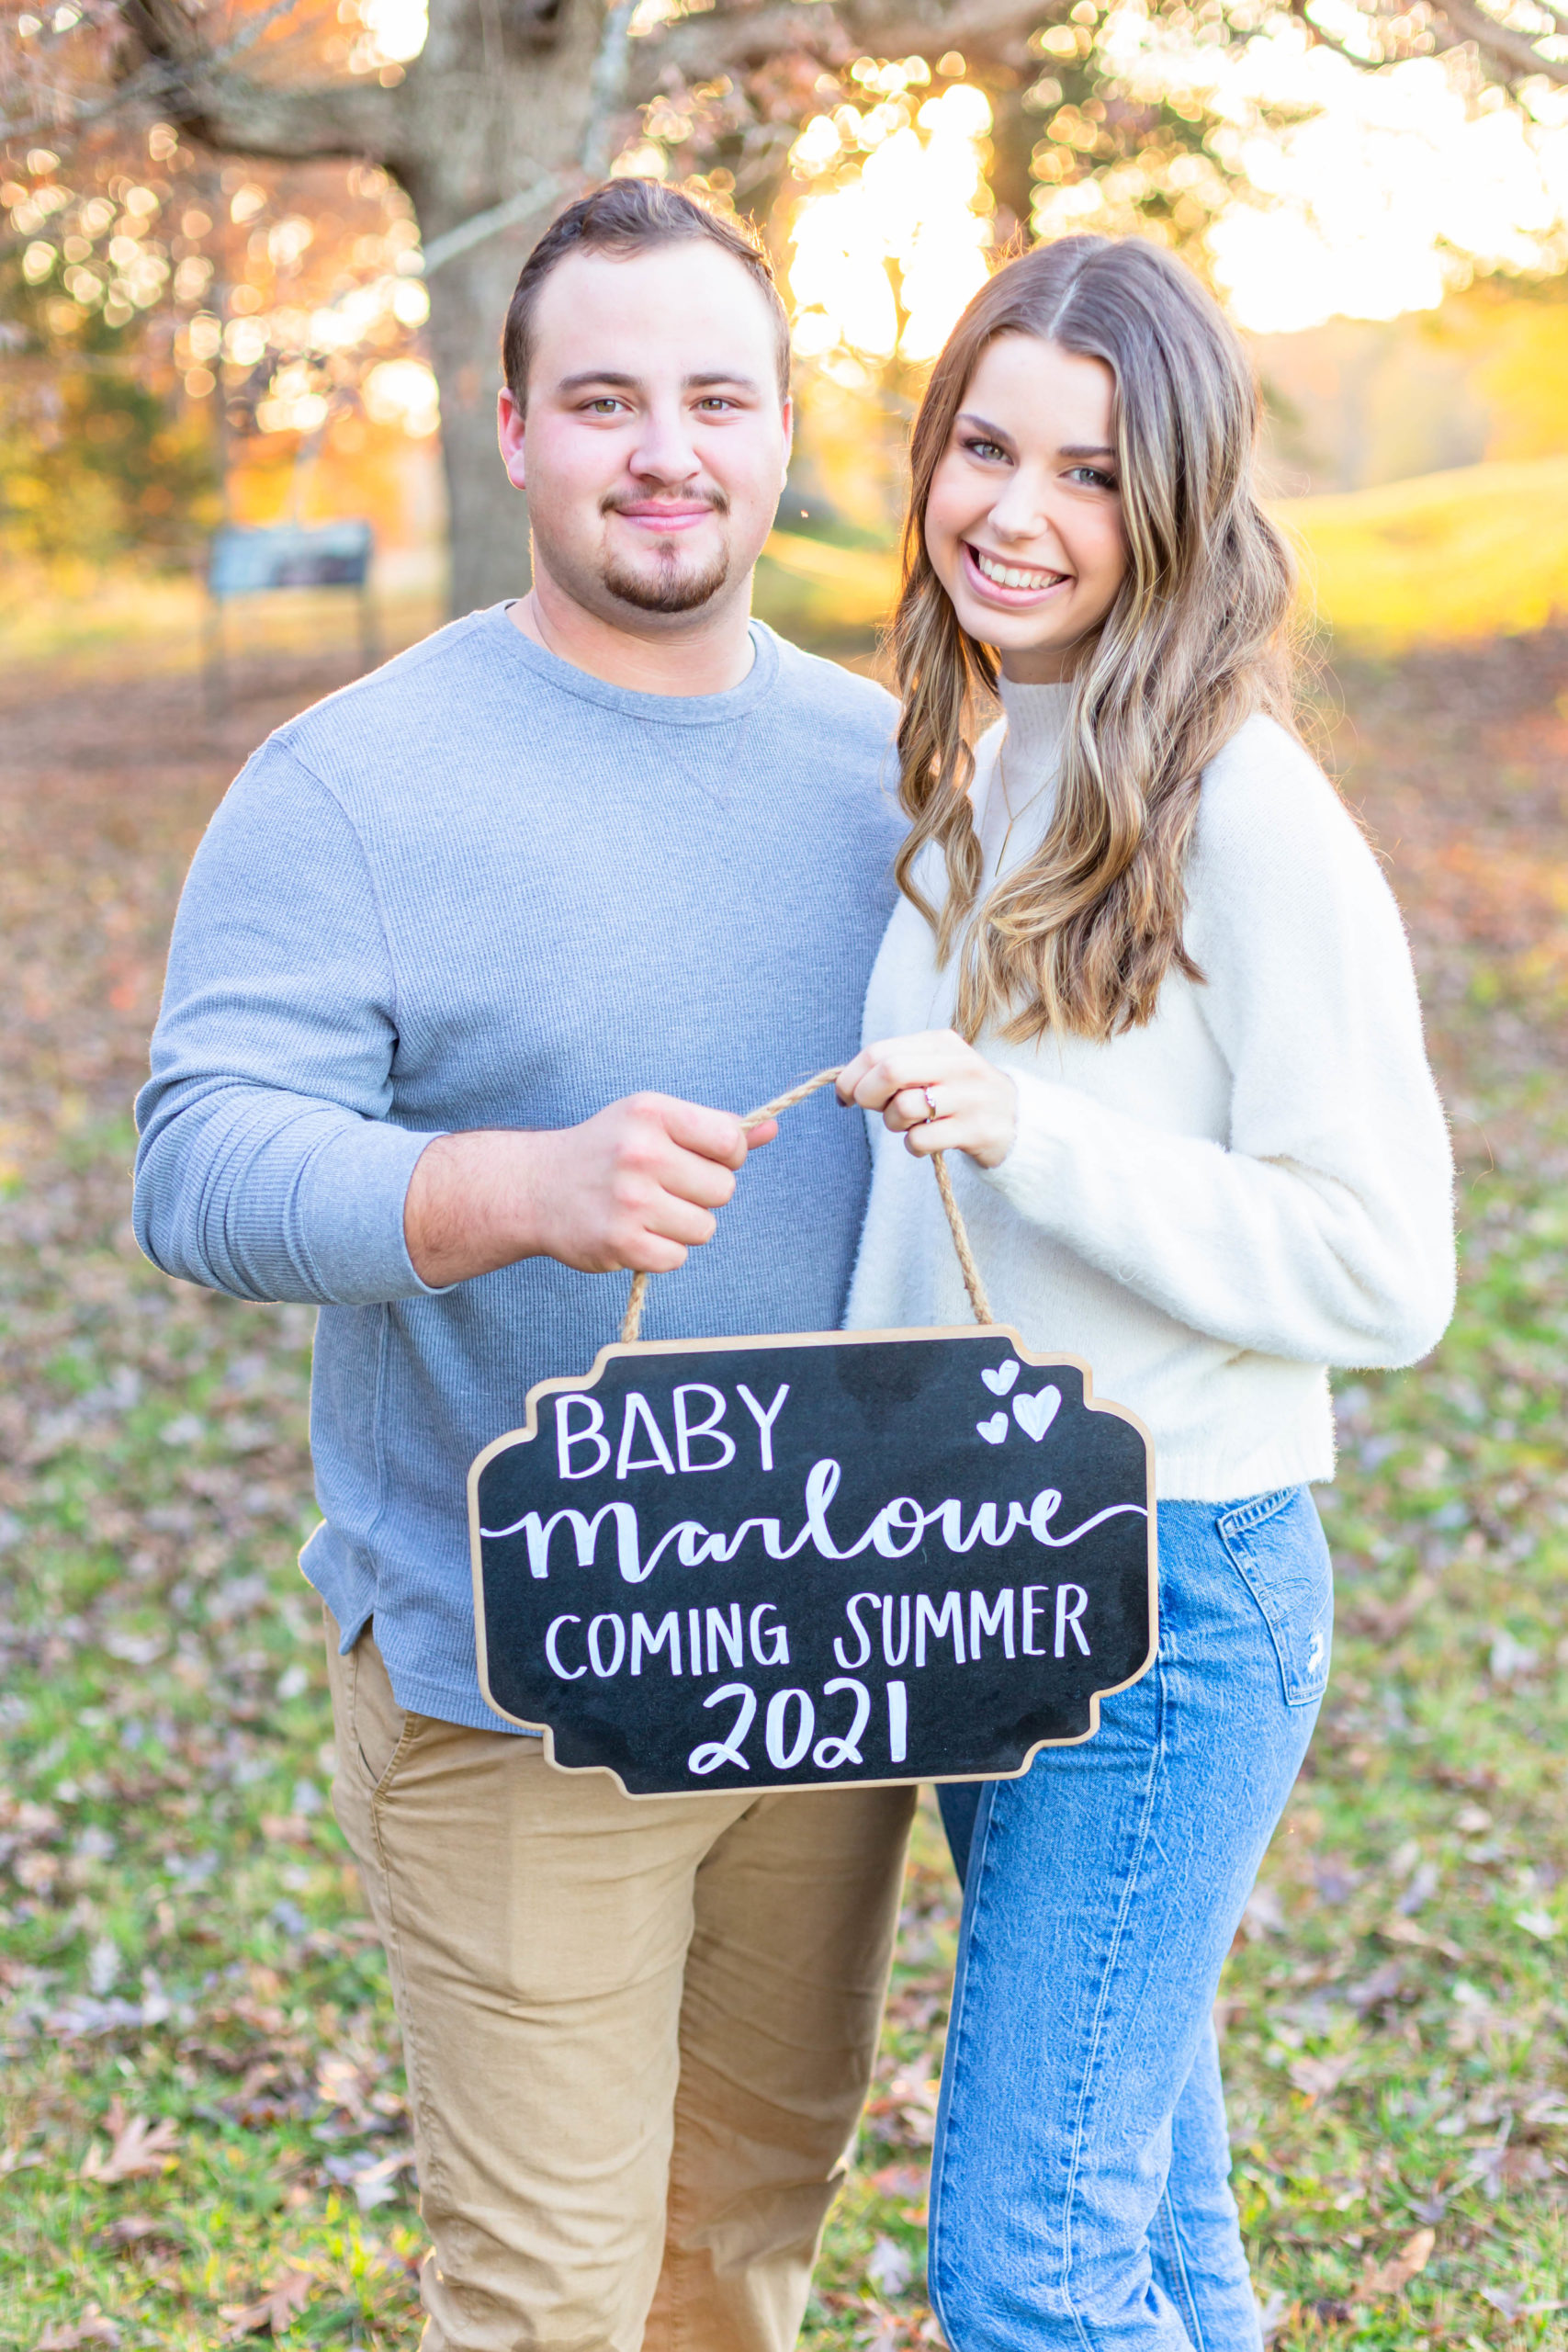 Baby announcement
